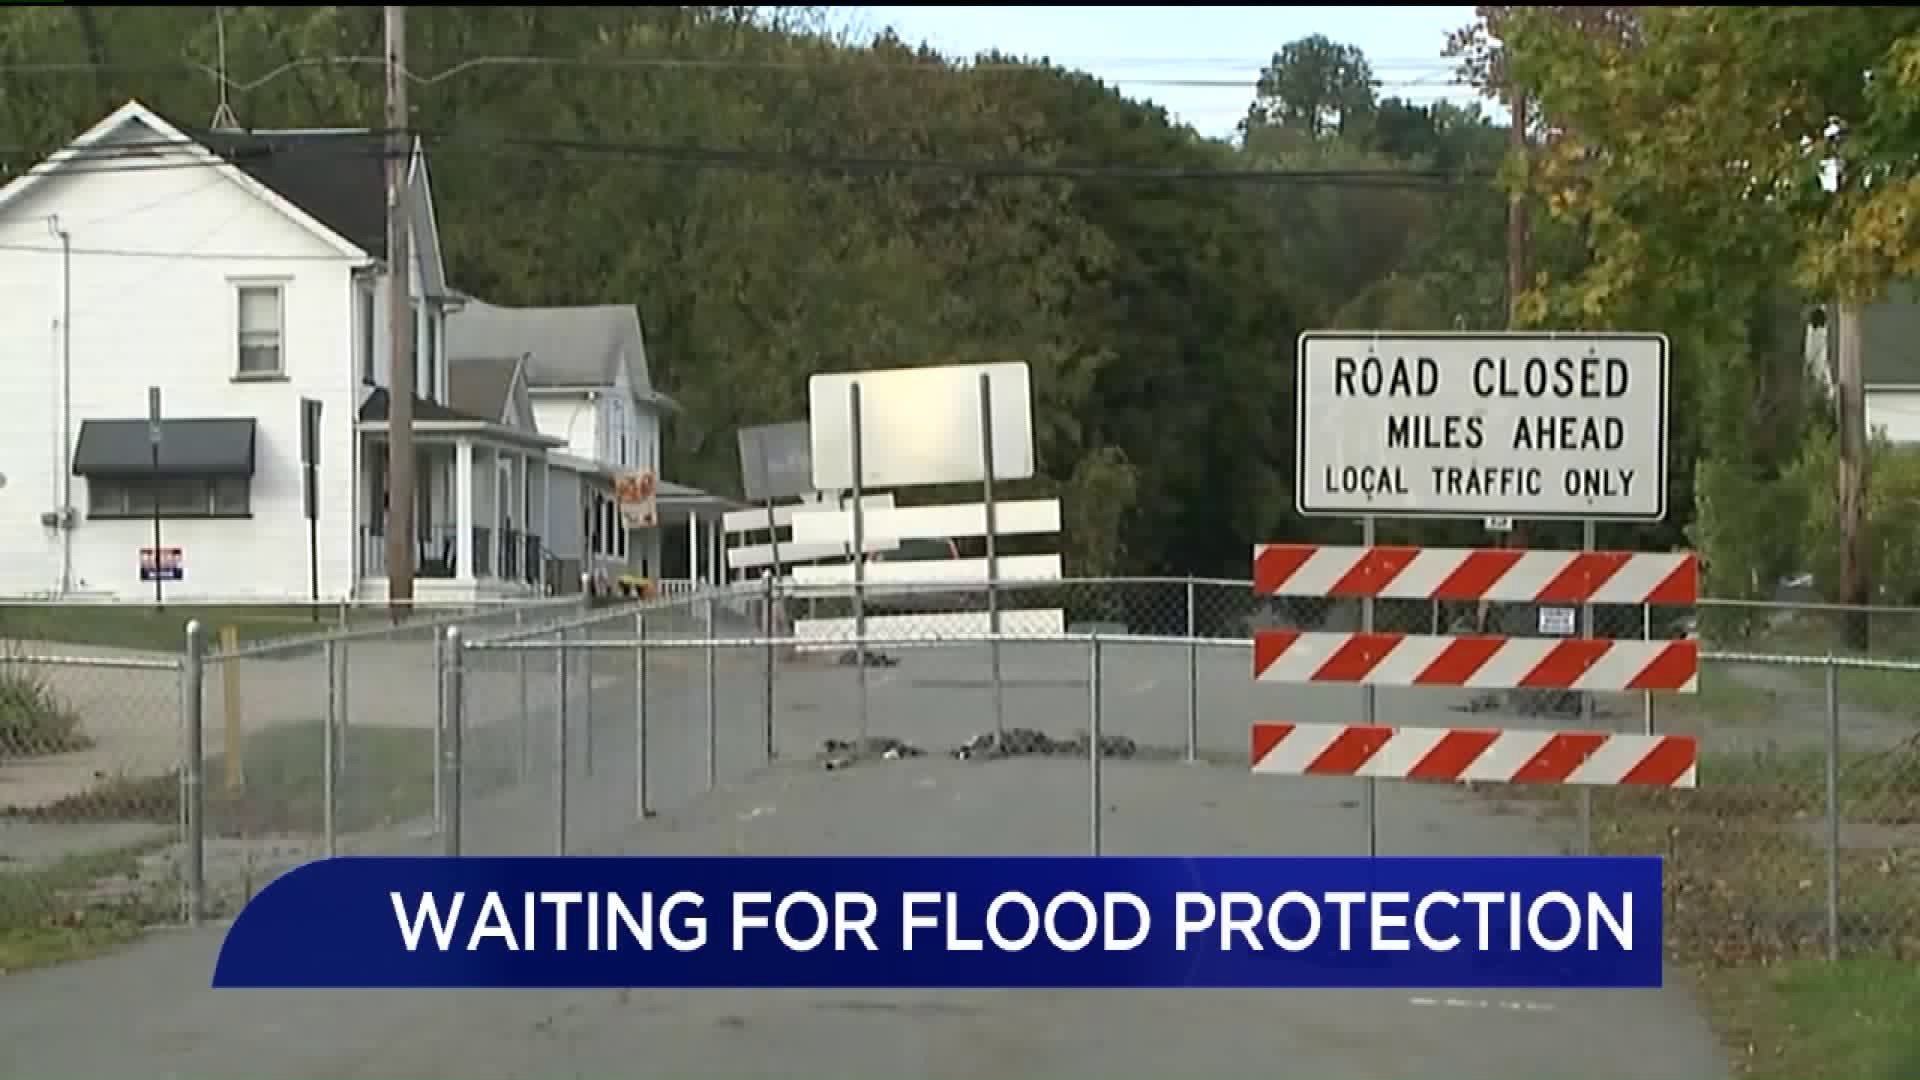 Frustration Arise Over Much Delayed Flood Protection Project